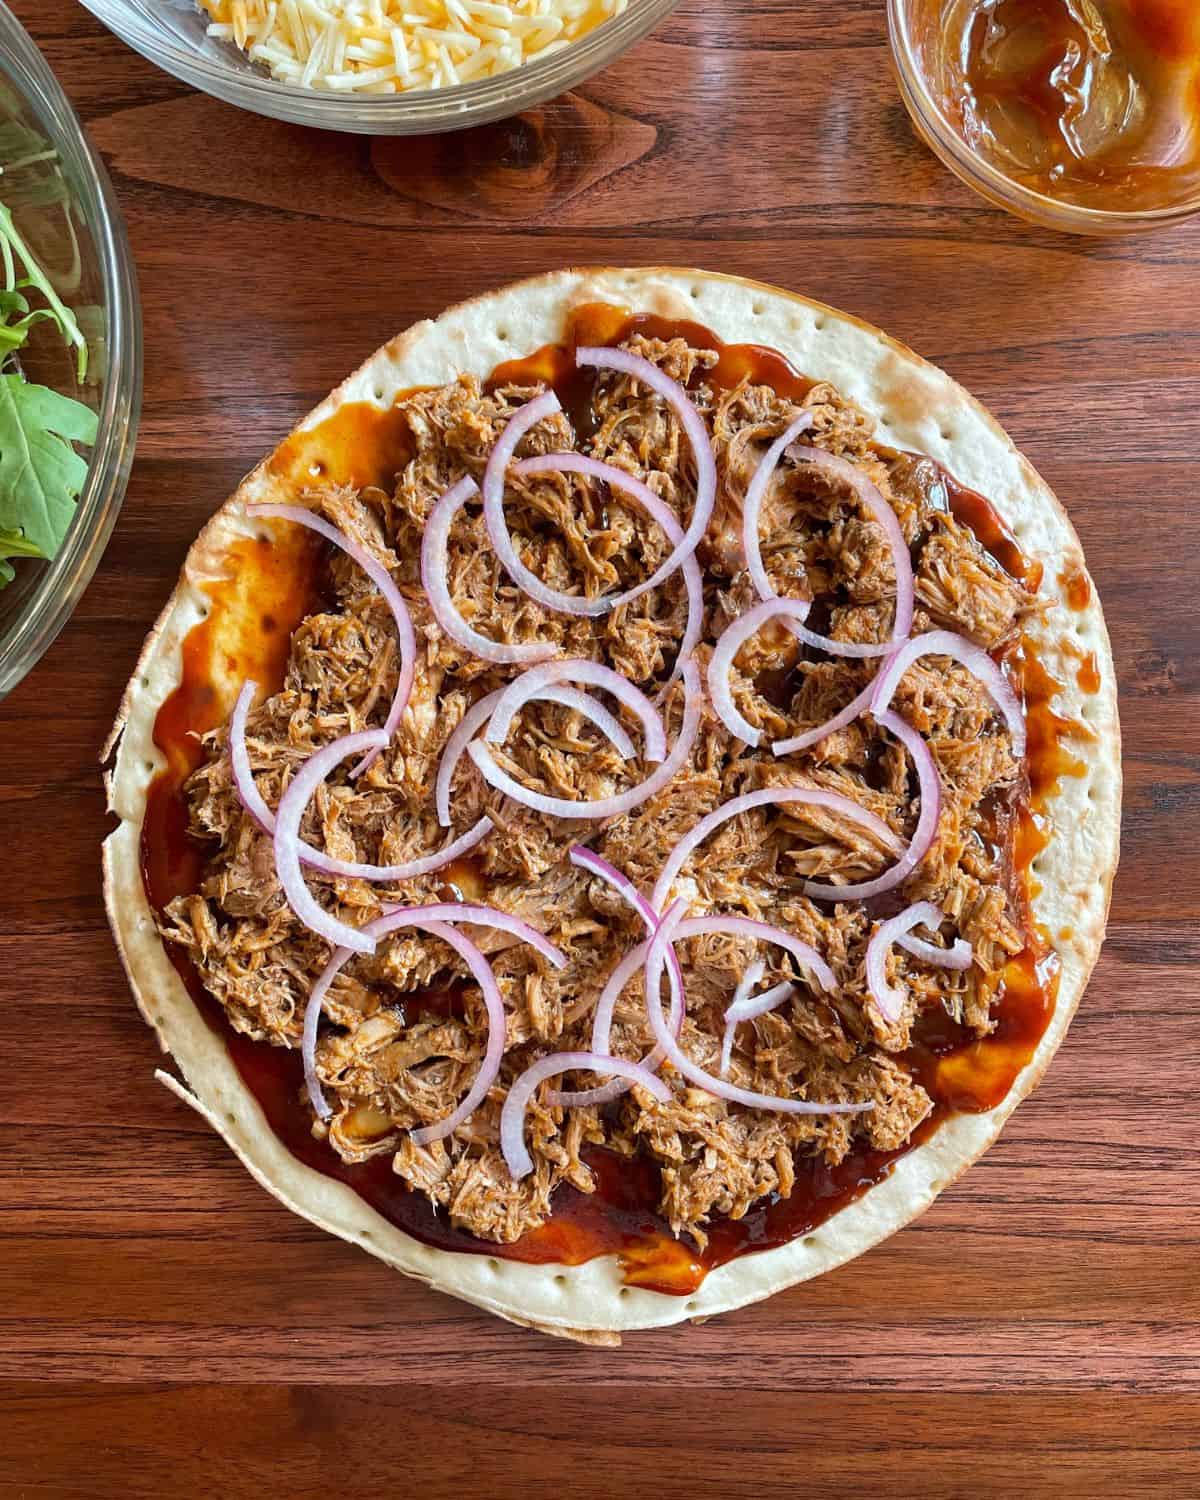 Pizza shell topped with sauce, pork, and sliced red onions.